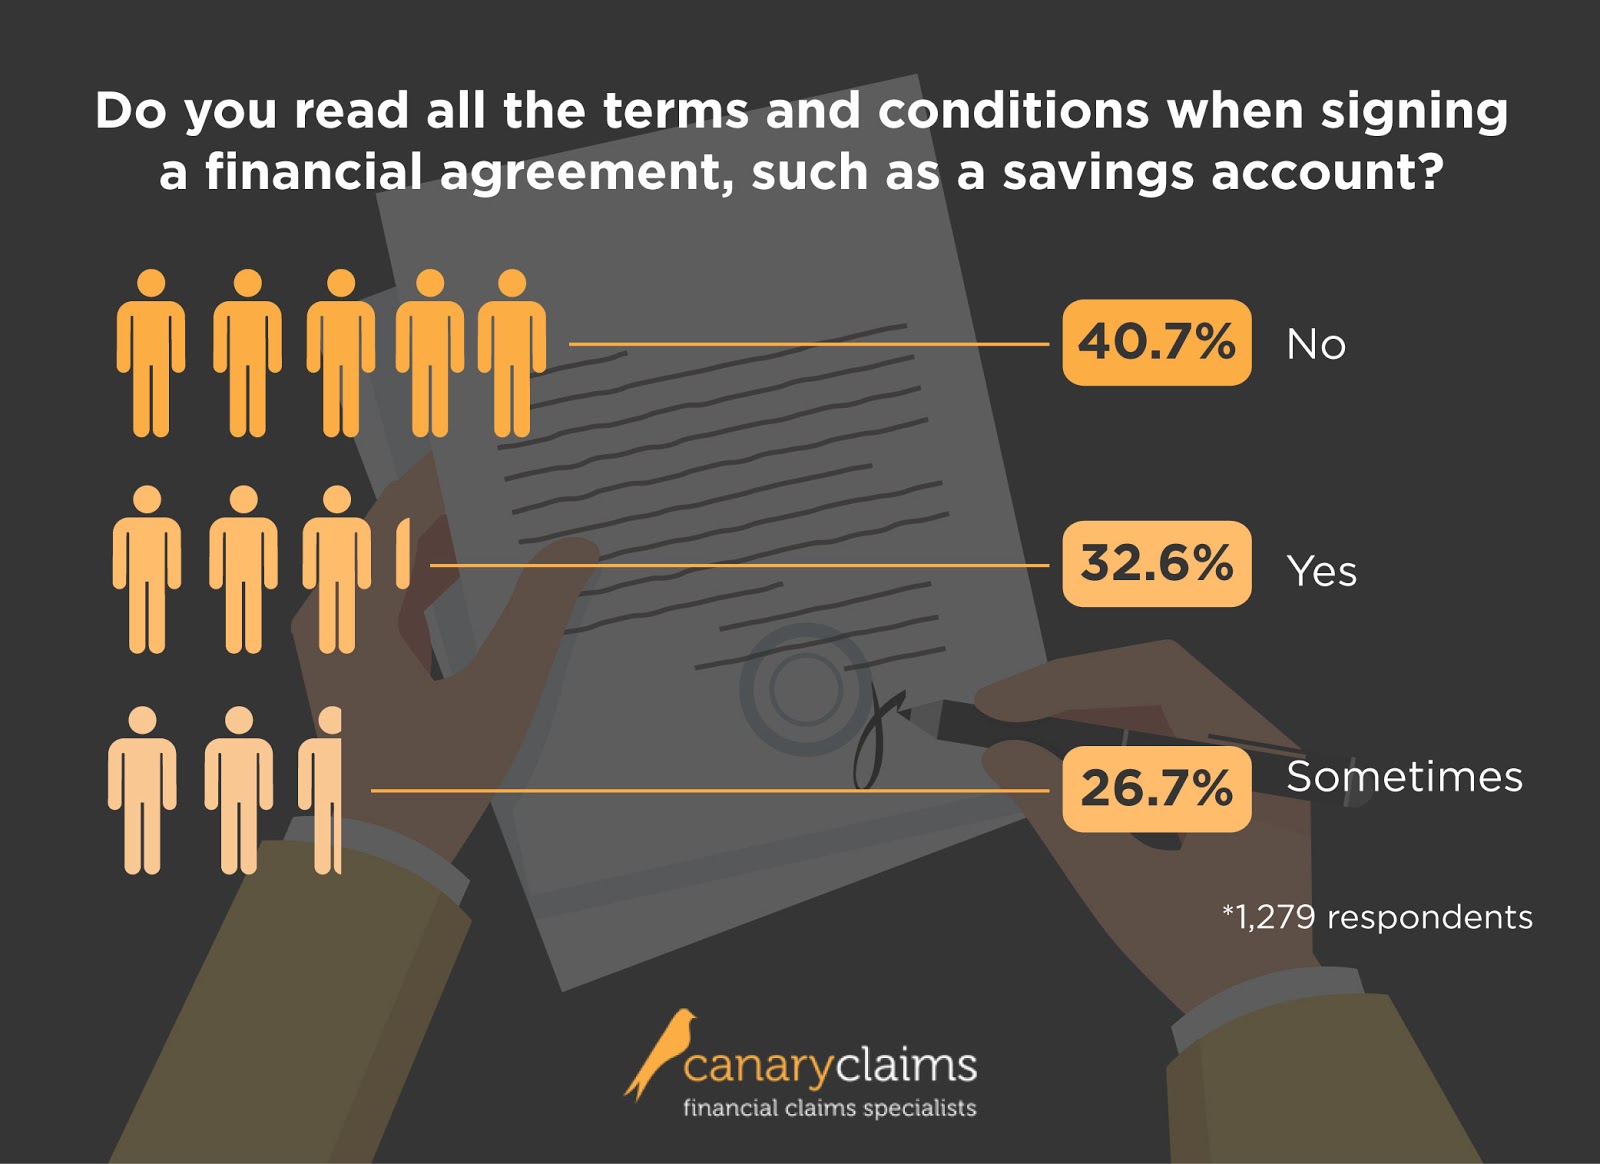 Financial terms and conditions survey results